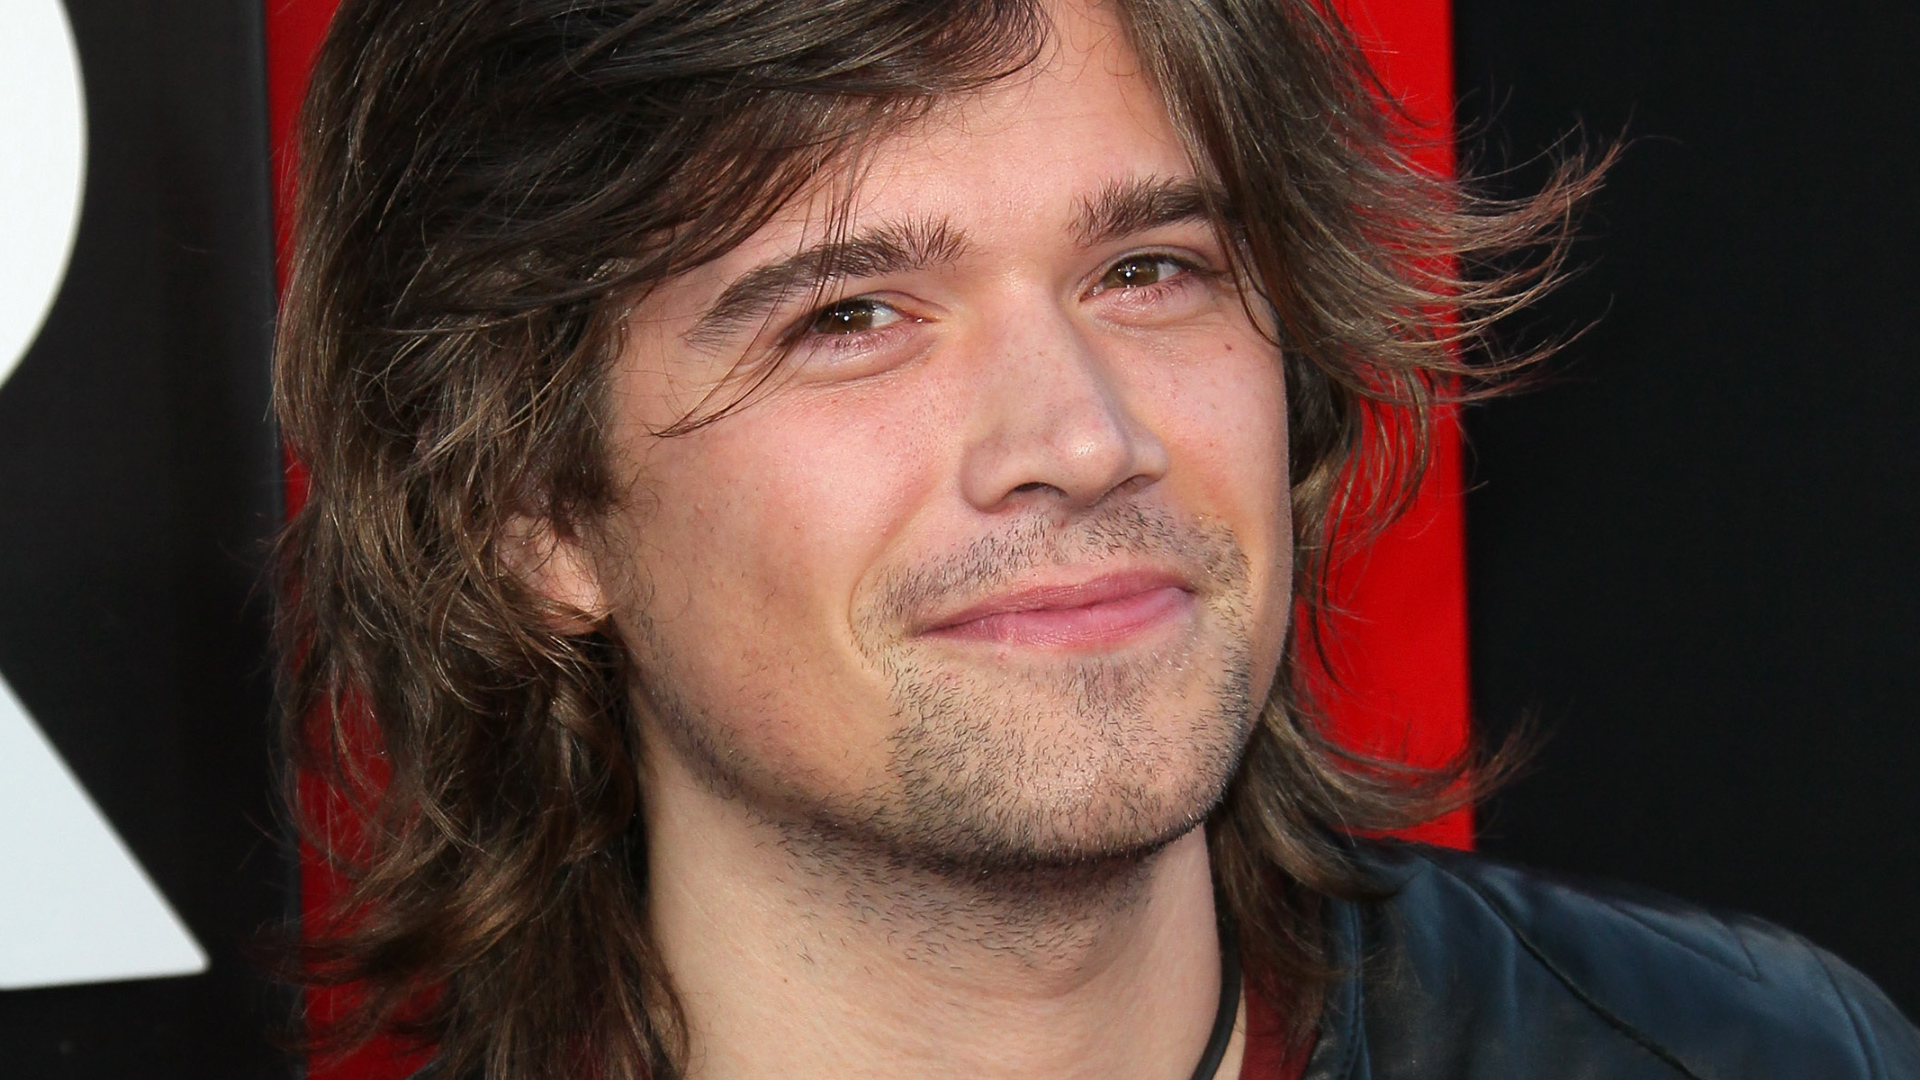 42 Facts About Zac Hanson - Facts.net